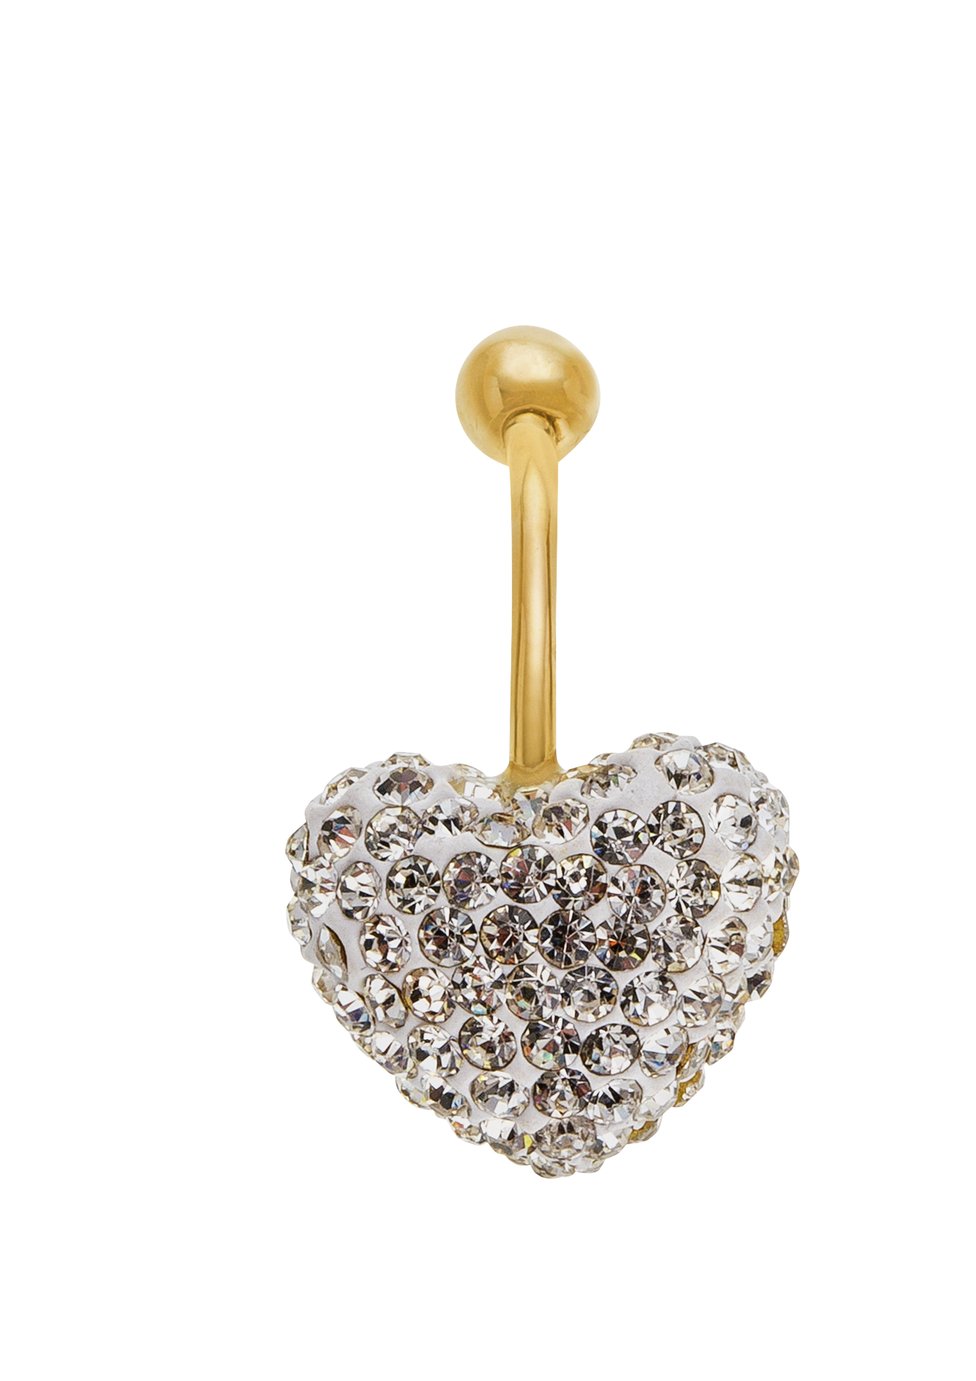 State of Mine 9ct Gold Glitter Heart Belly Bar